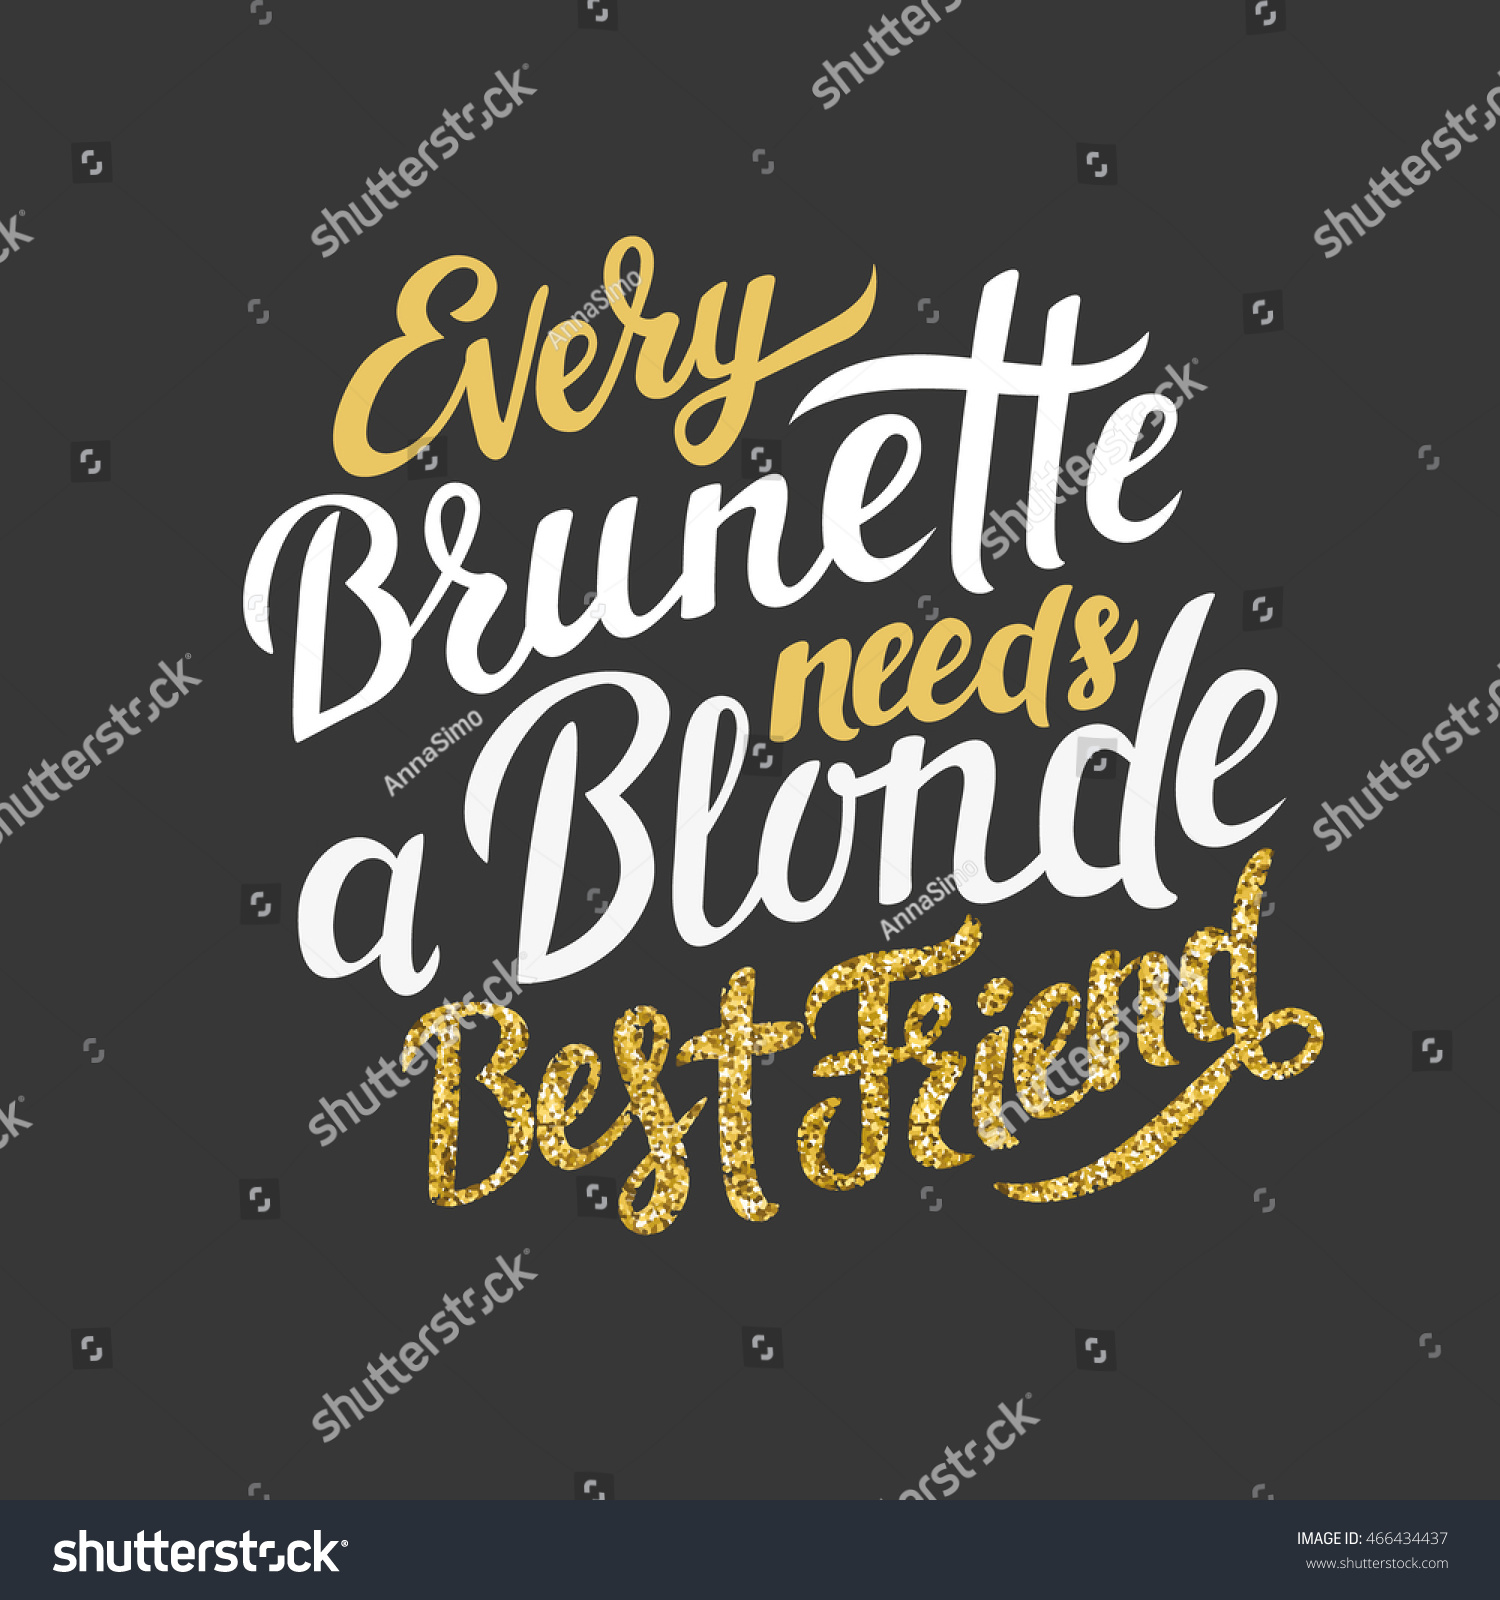 Every Brunette Needs A Blonde Best Friend Poster Slogan For Friends Day Stock Vector 